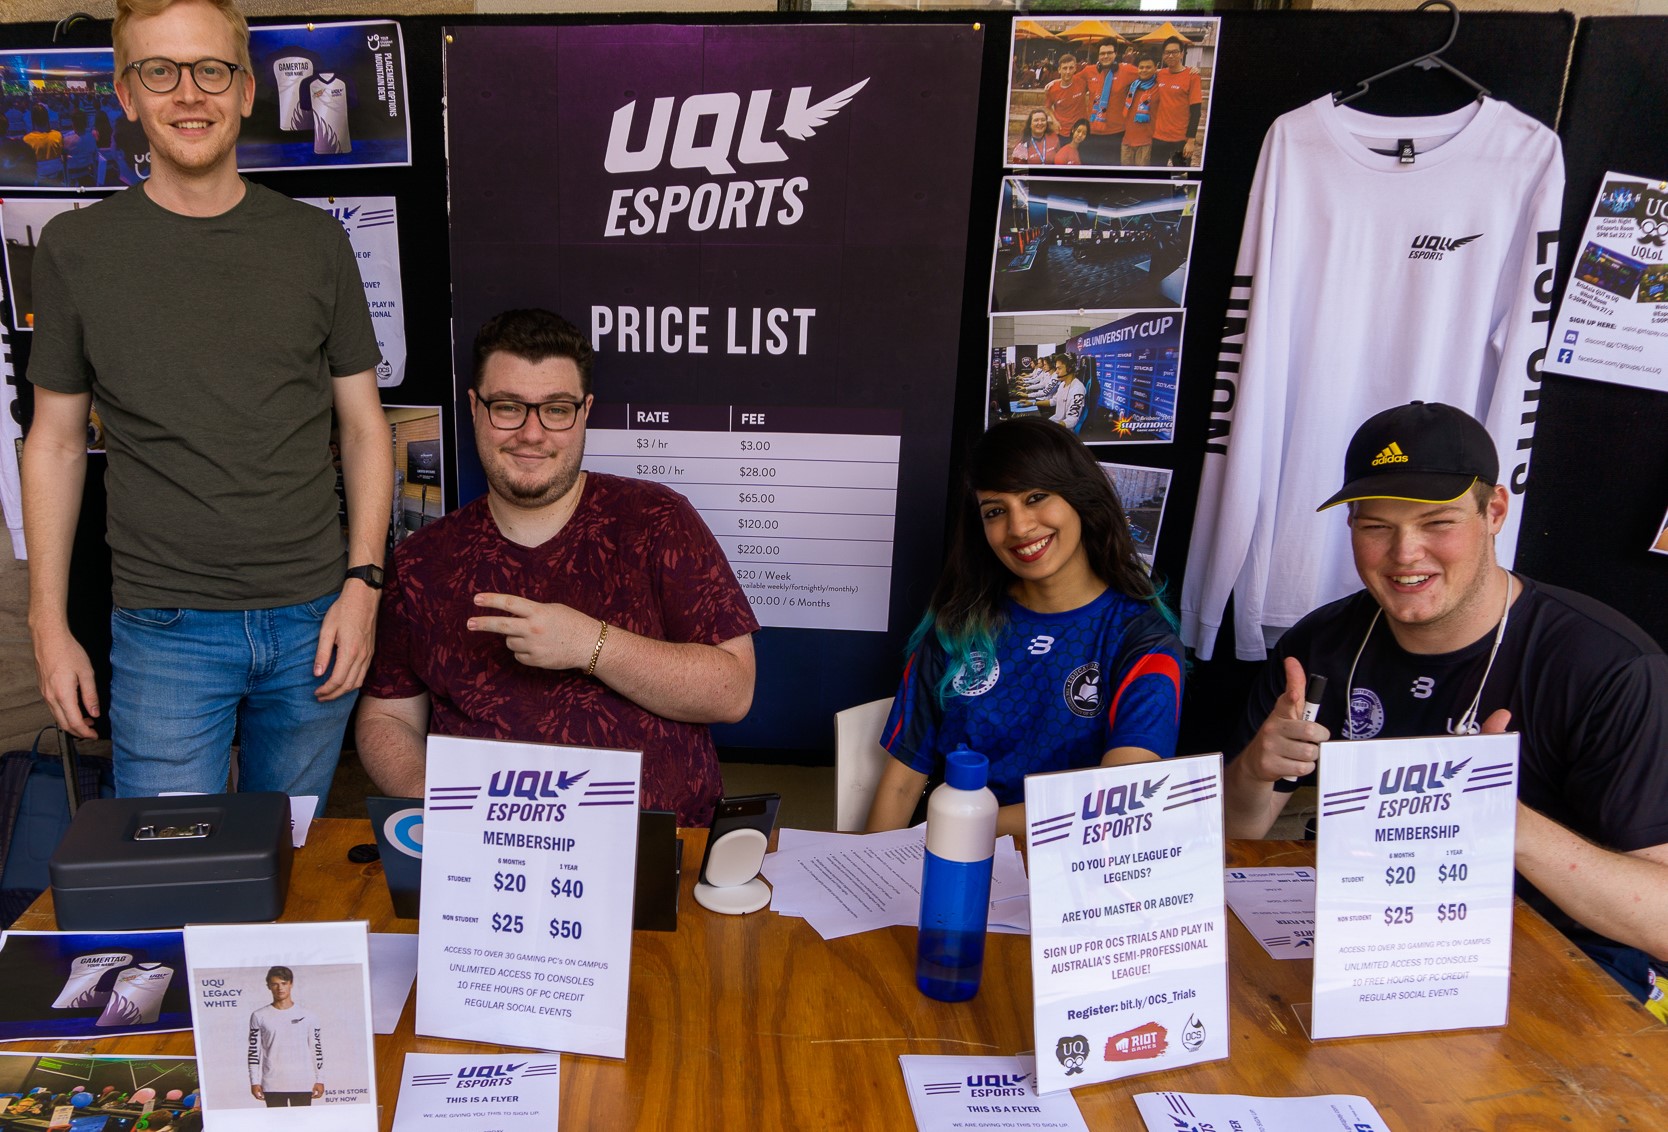 UQU Esports event powered by qpay